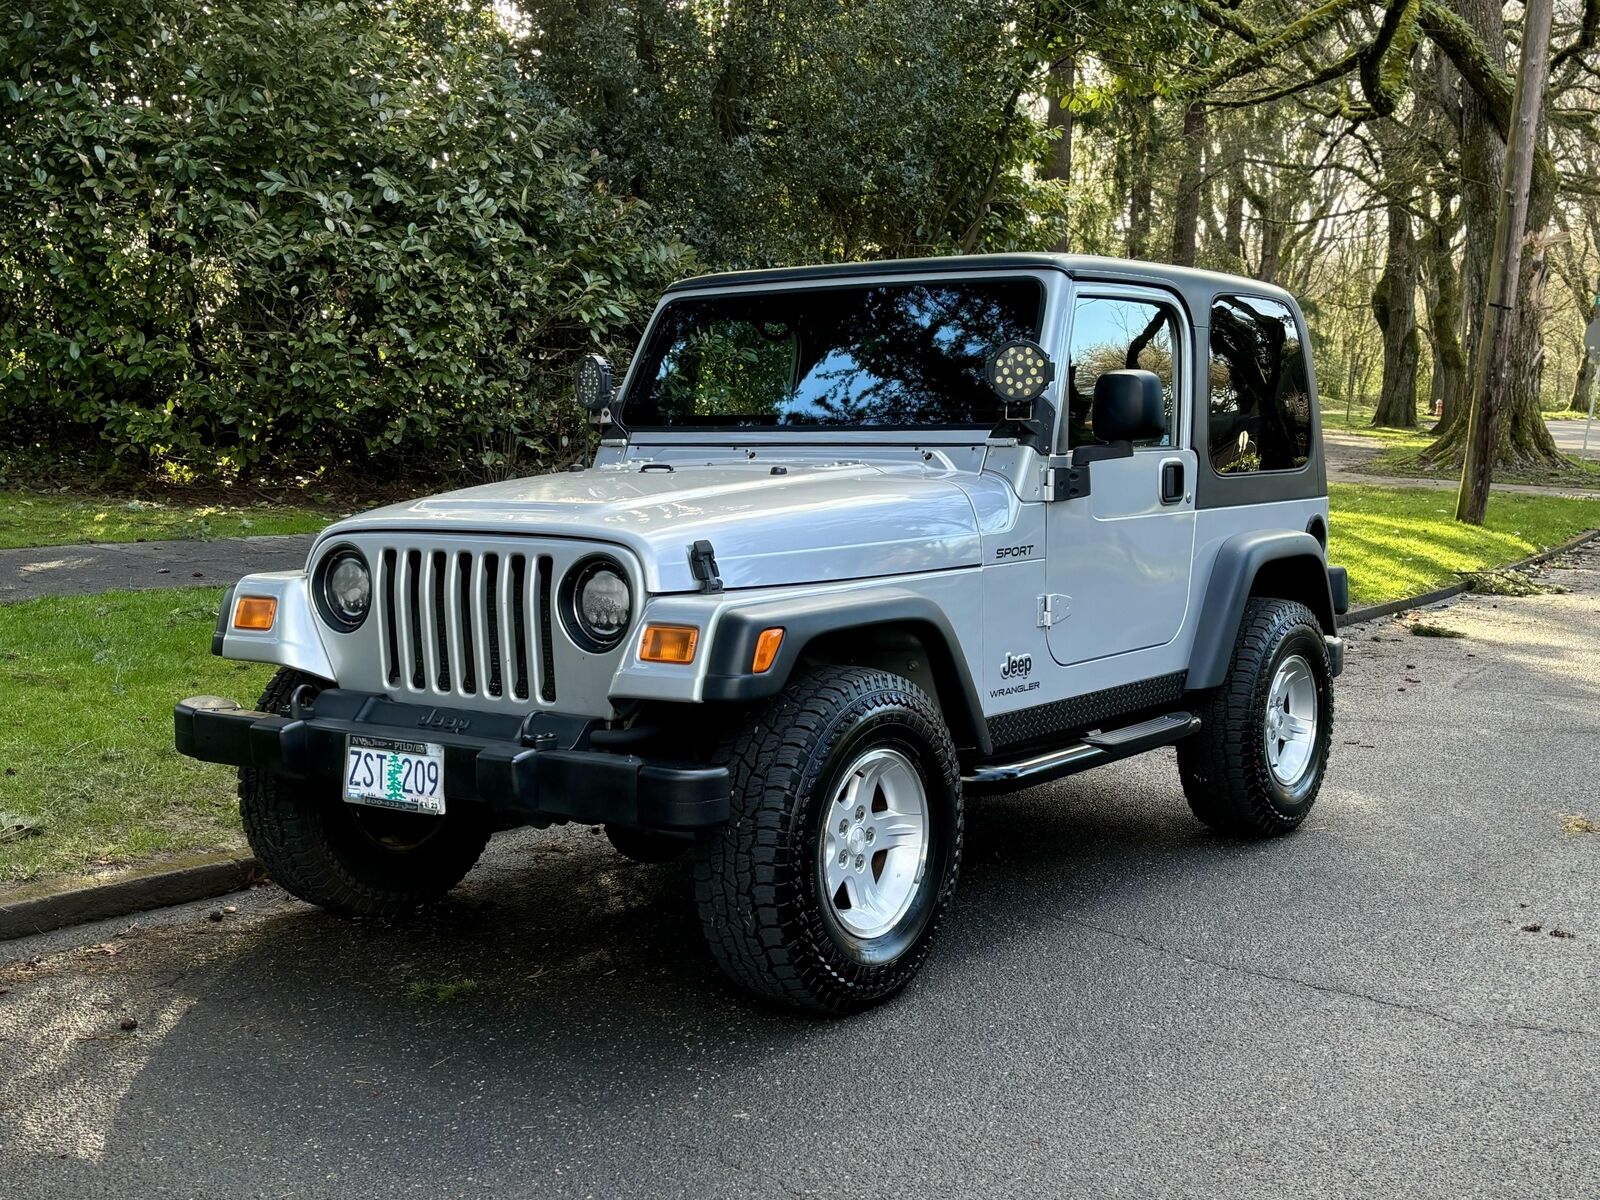 2004 JEEP WRANGLER SPORT 4X4 5-SPEED 2DR HARD TOP SUV 4.0L 6'CYL ONLY 114K MILES